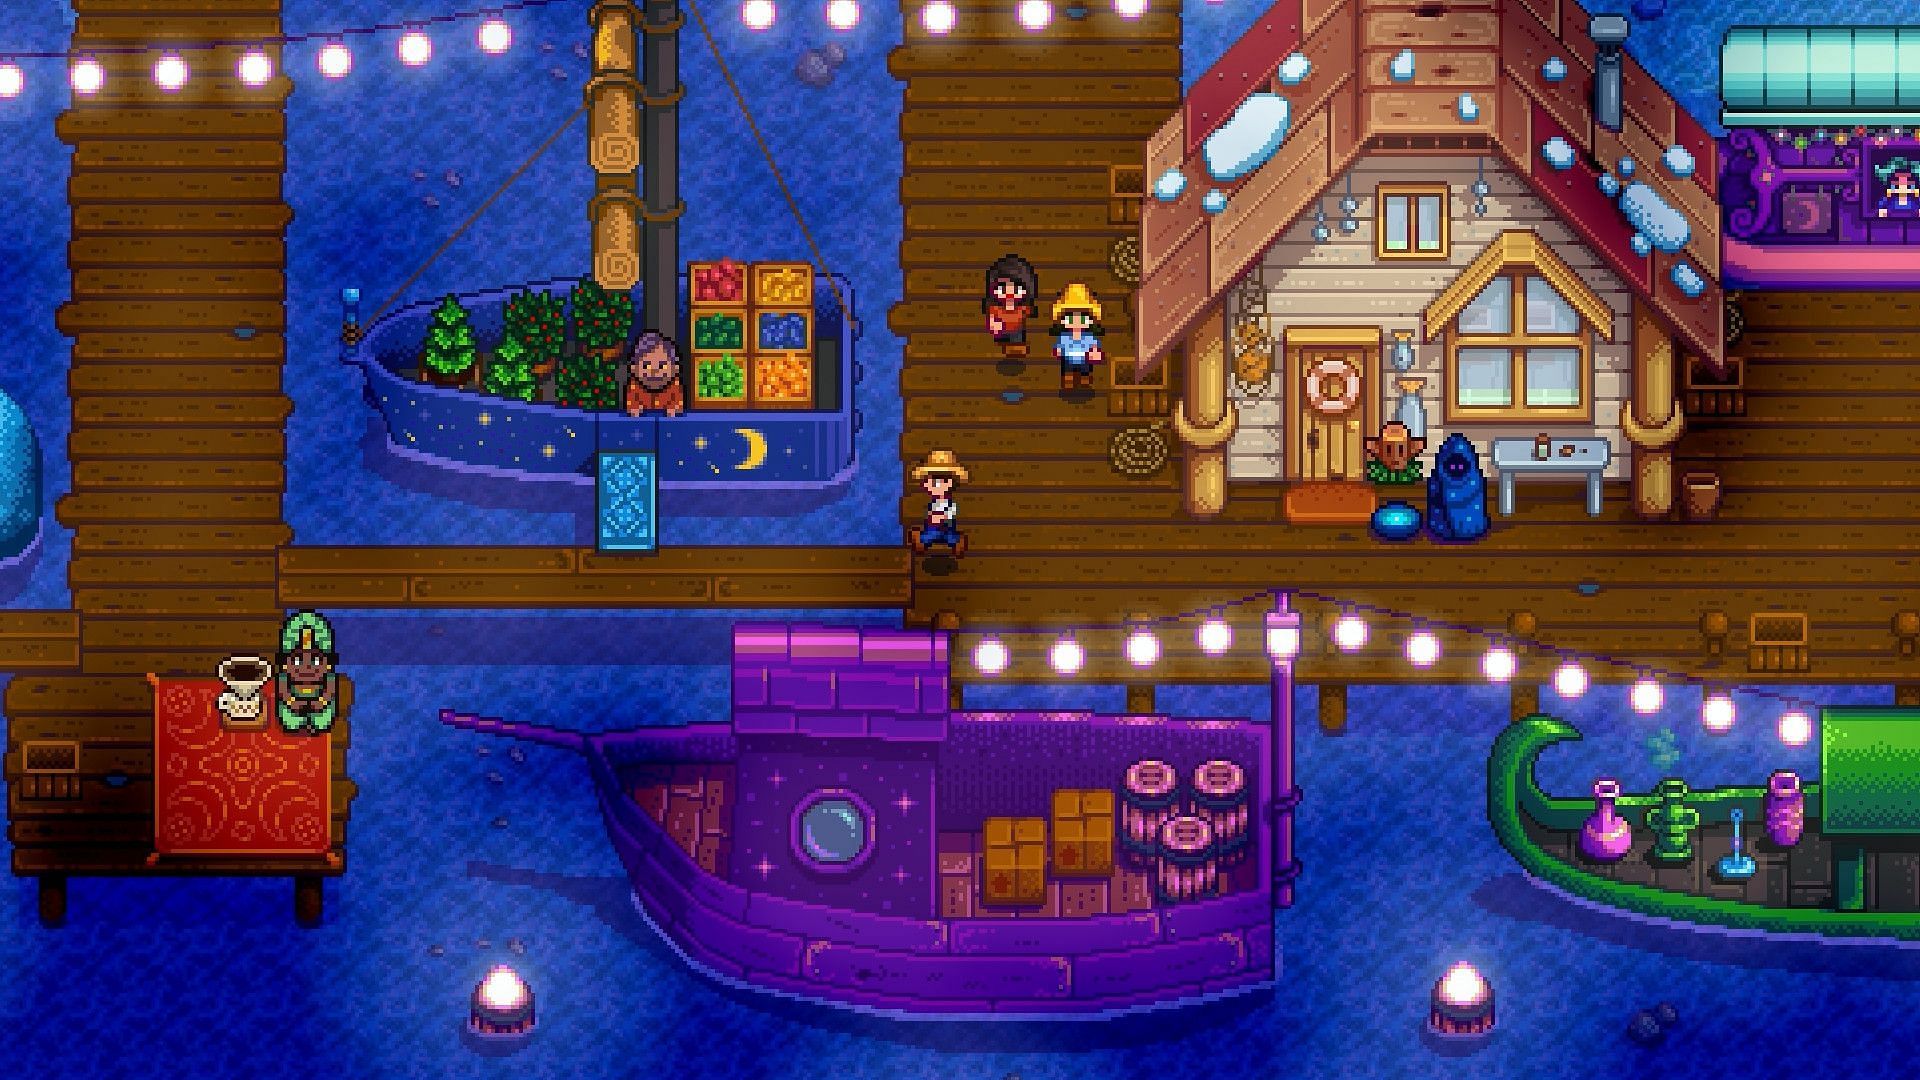 You can catch the Sea Cucumber in Stardew Valley by fishing (Image via ConcernedApe)